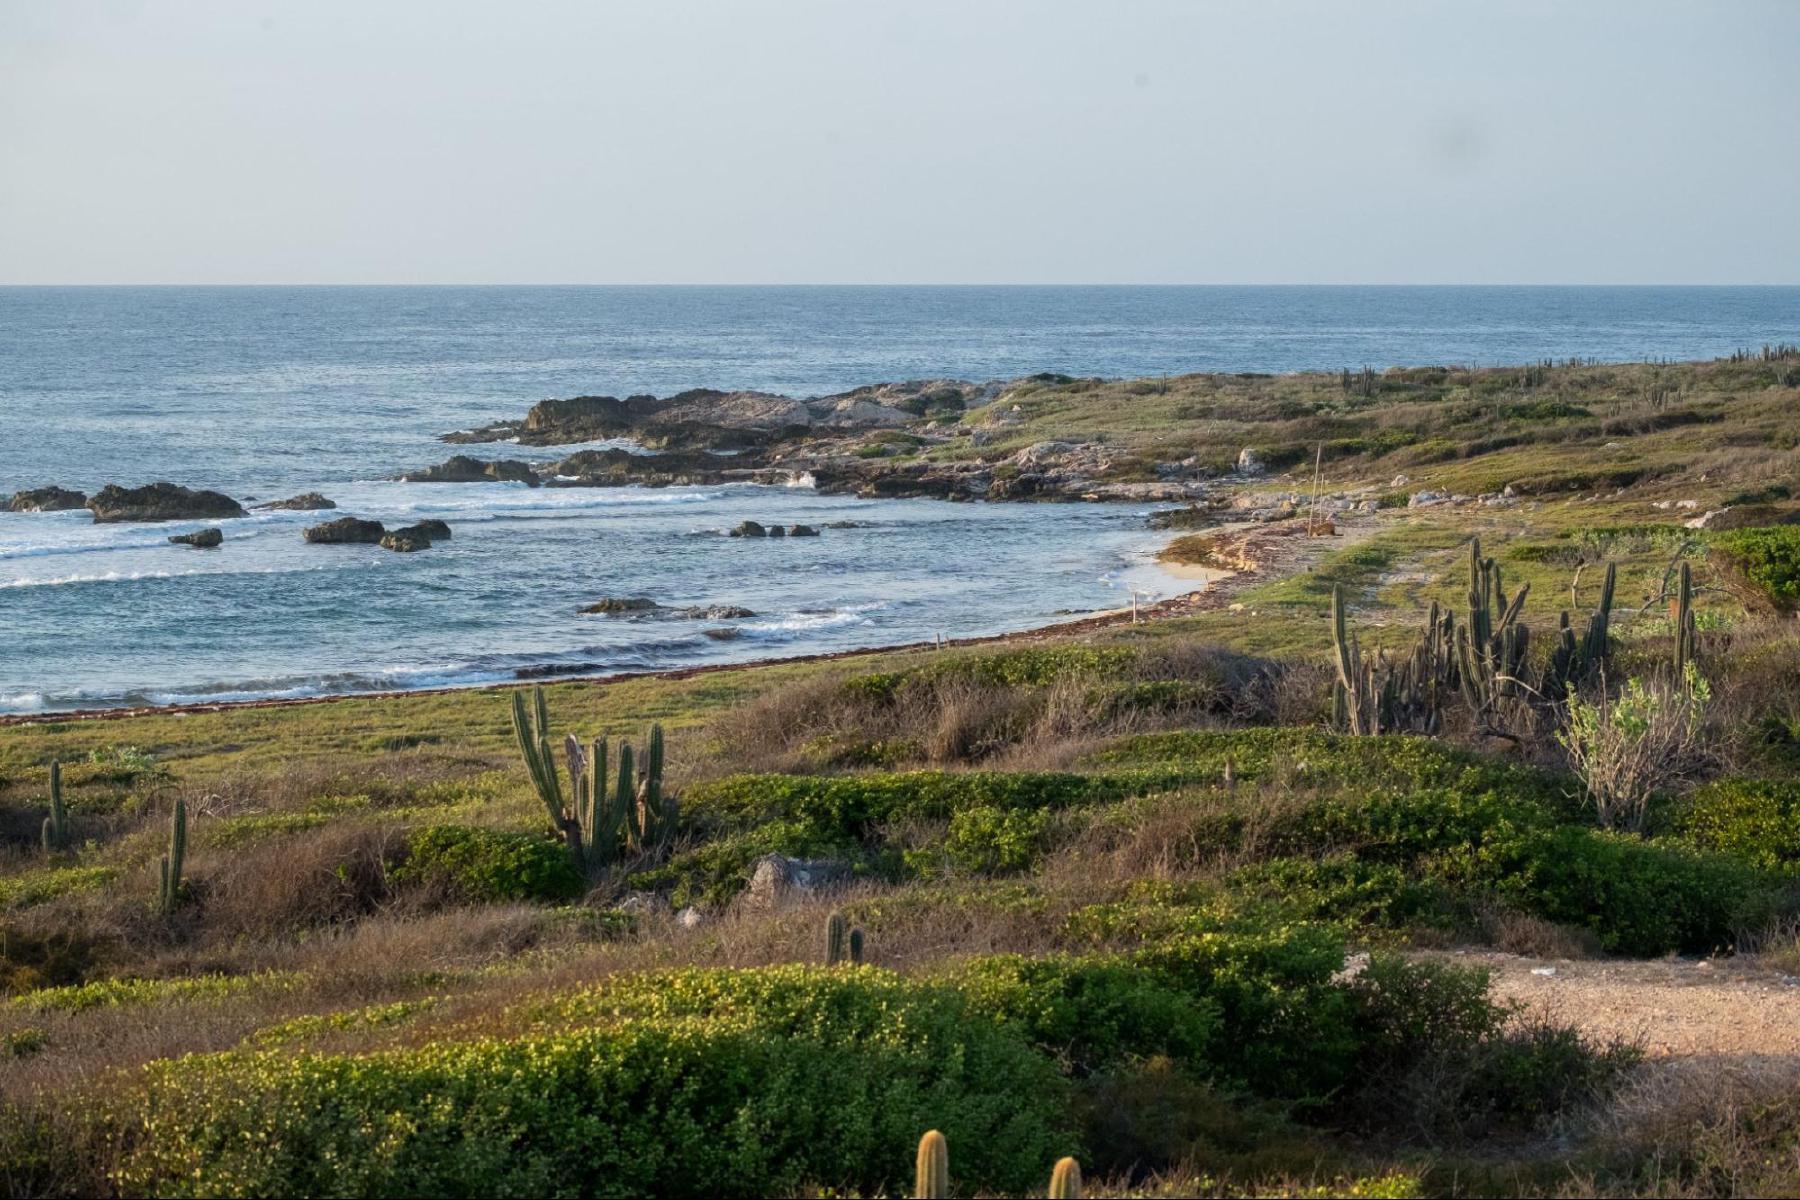 a dry coastal landscape, with a beach in the distance and lots of cactus